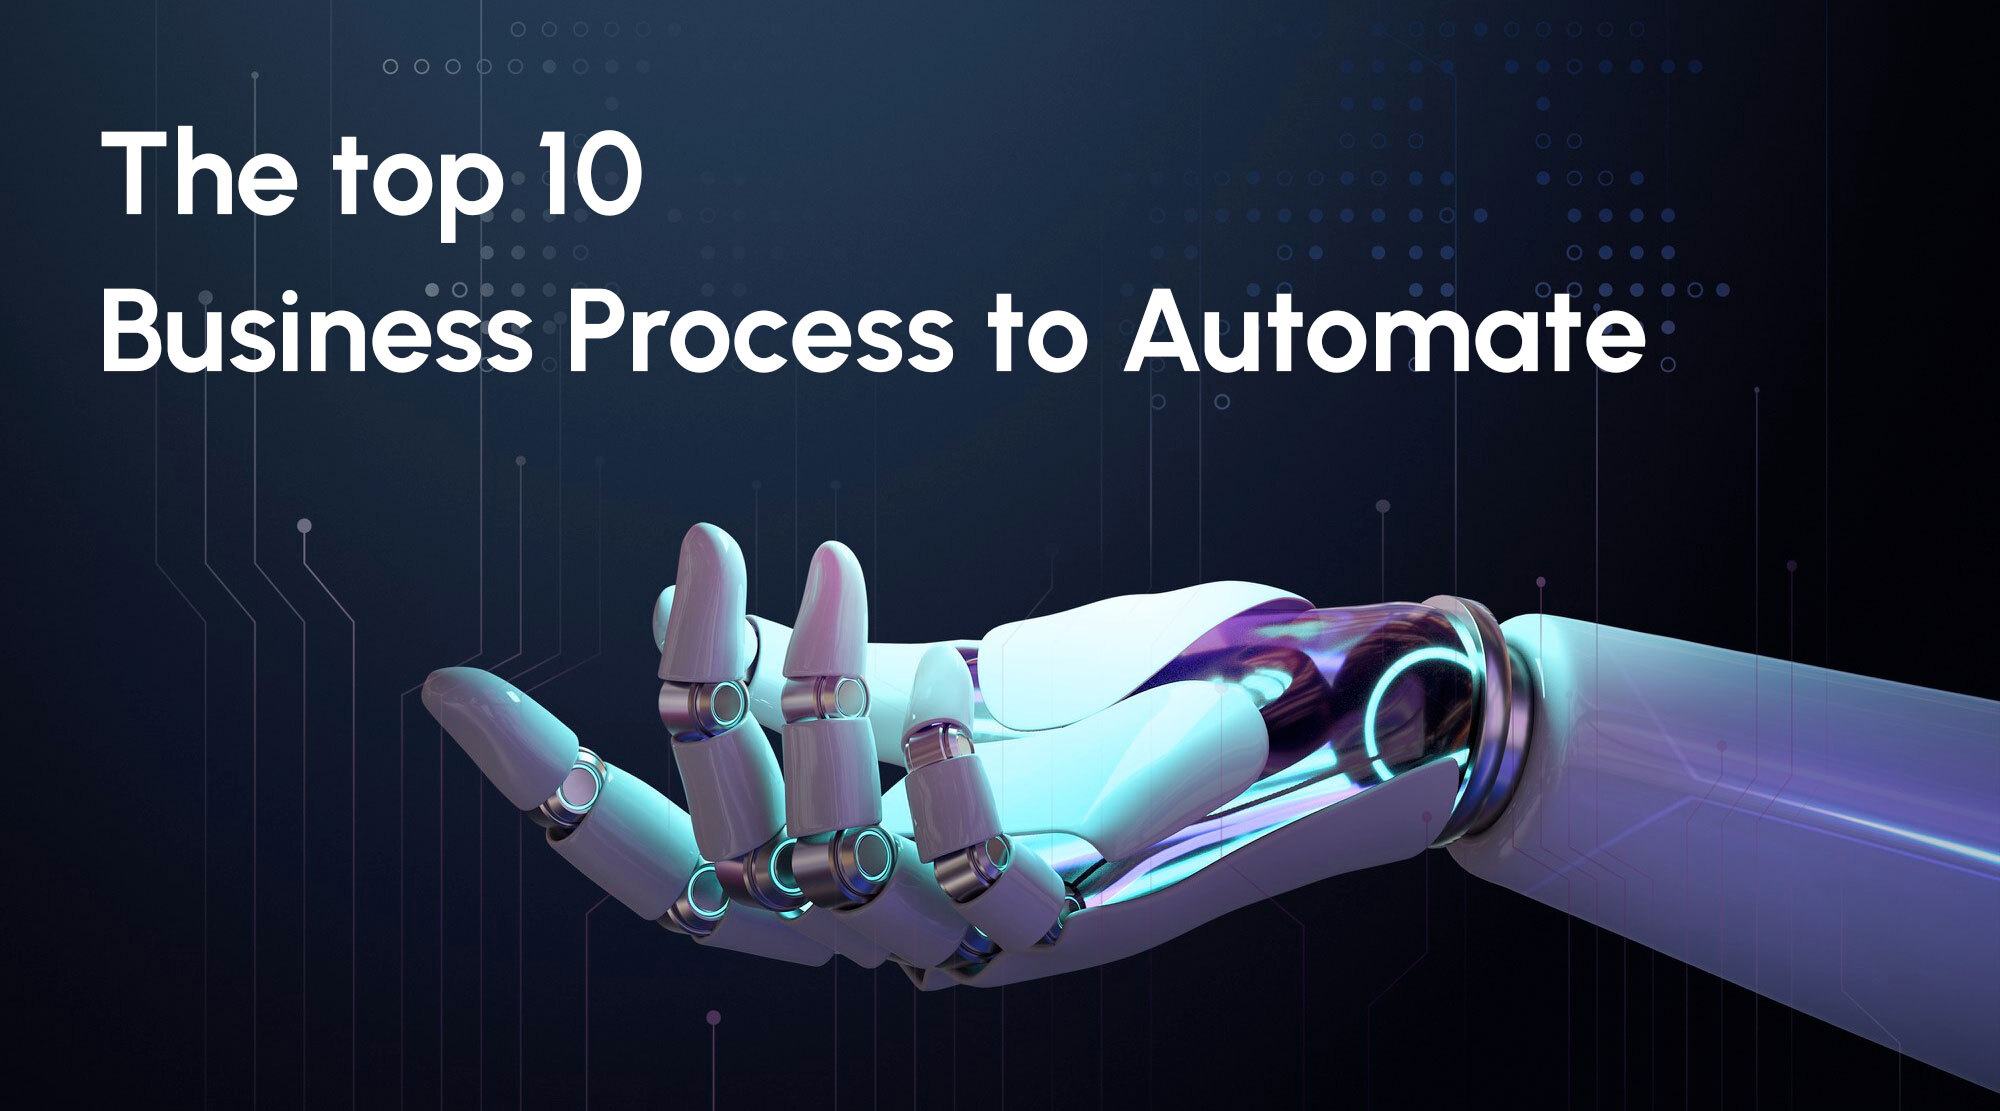 Top Business Processes to Automate